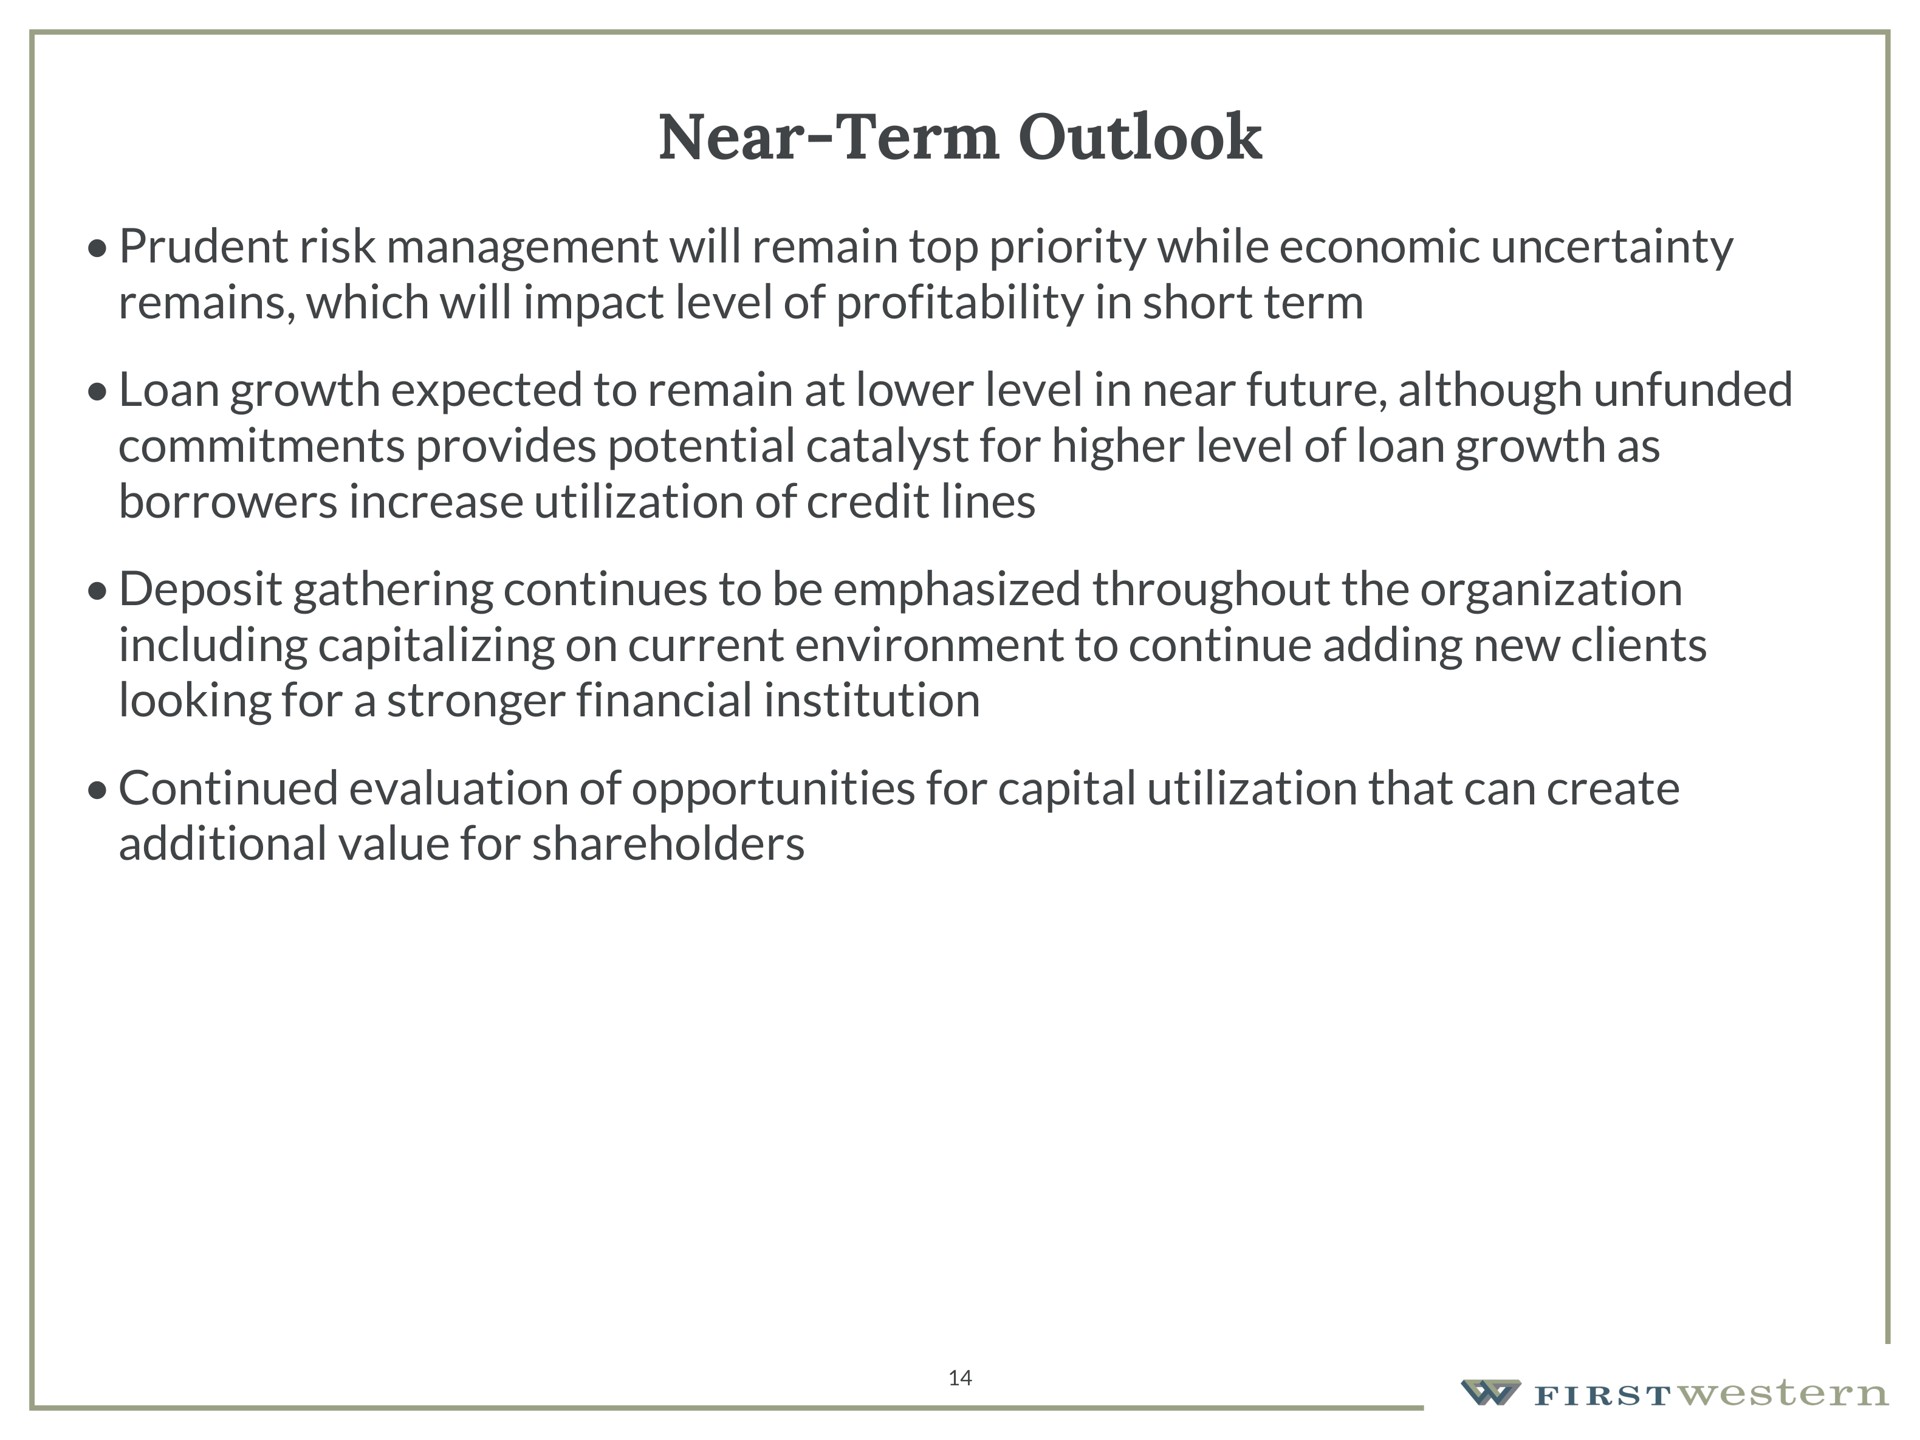 near term outlook prudent risk management will remain top priority while economic uncertainty remains which will impact level of profitability in short term loan growth expected to remain at lower level in near future although unfunded commitments provides potential catalyst for higher level of loan growth as borrowers increase utilization of credit lines deposit gathering continues to be emphasized throughout the organization including capitalizing on current environment to continue adding new clients looking for a financial institution continued evaluation of opportunities for capital utilization that can create additional value for shareholders | First Western Financial